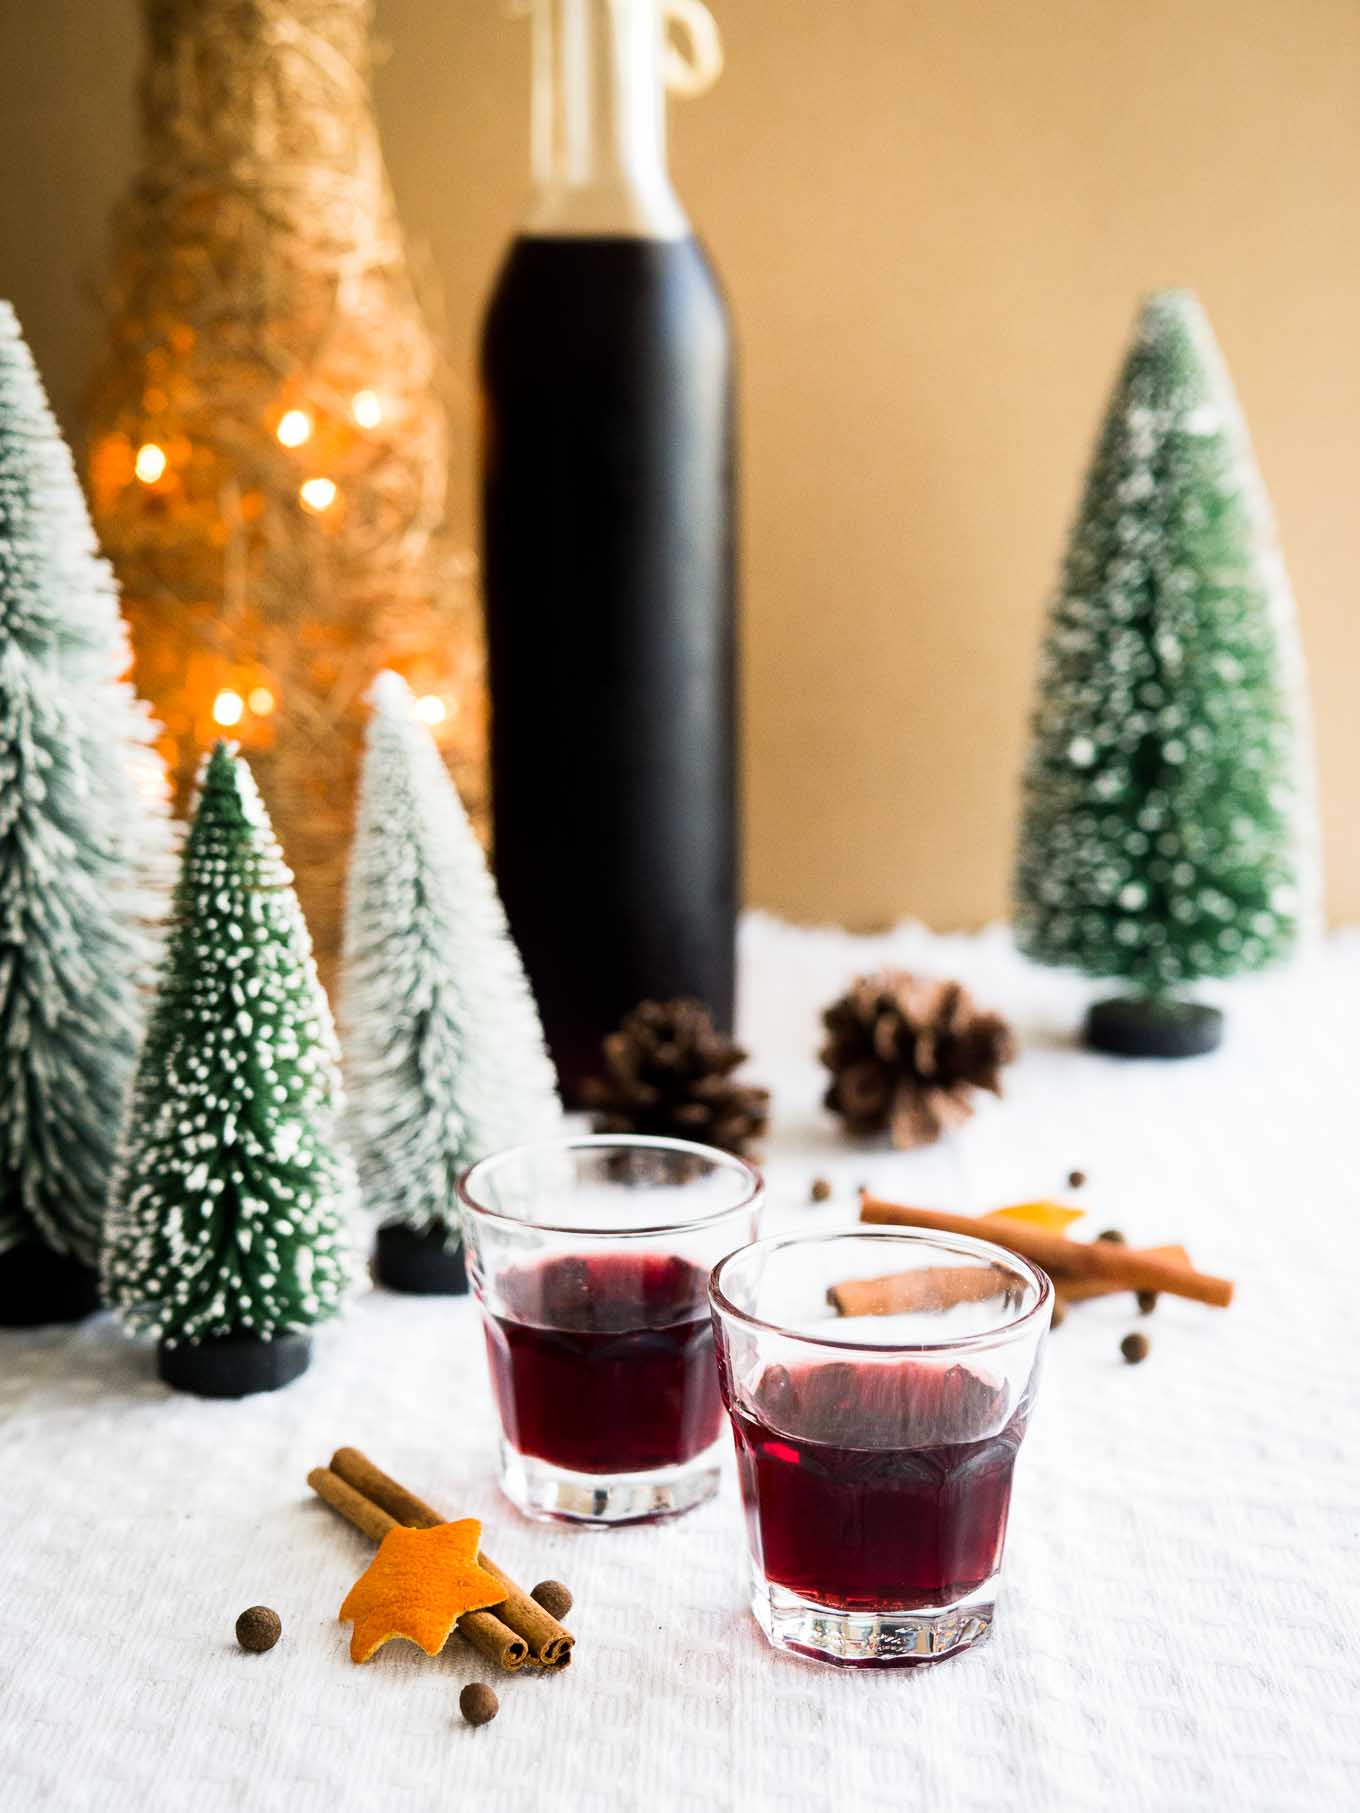 This easy mulled wine liqueur makes a perfect Christmas gift! Dark rum and red wine are infused with mulling spices, making this homemade drink as festive as the holiday season gets.